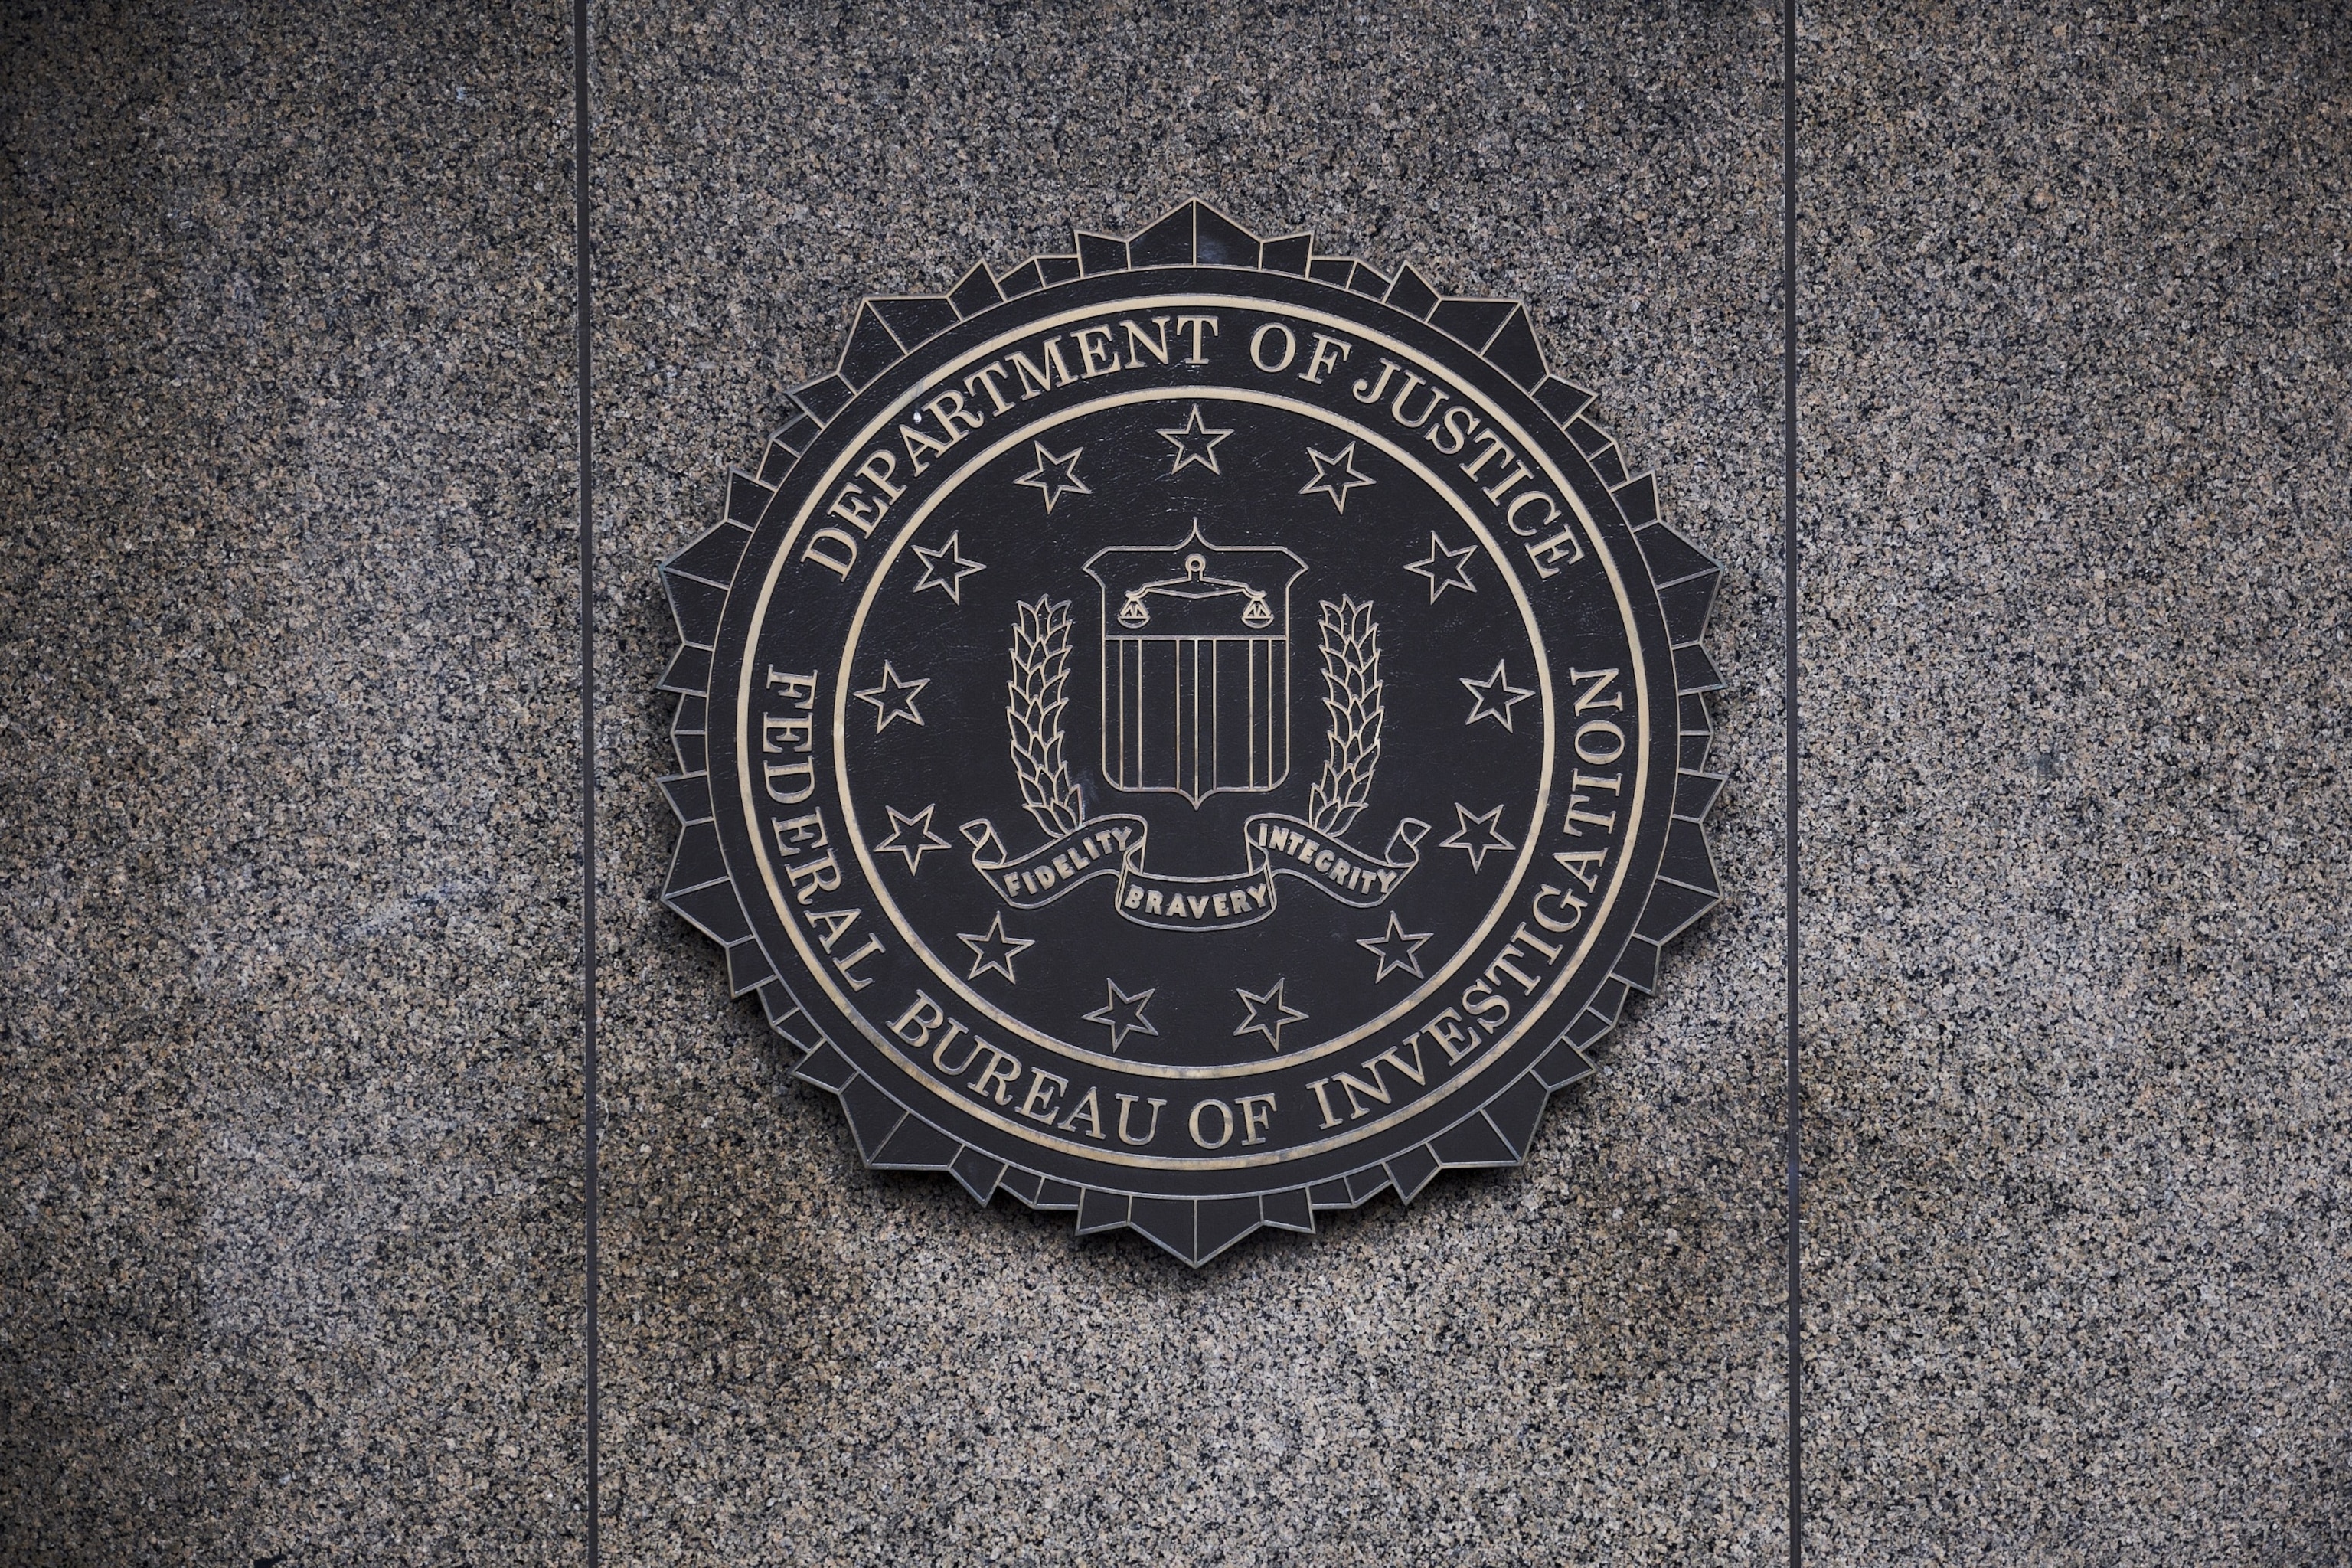 PHOTO: In this Feb. 2, 2018 file photo, the Federal Bureau of Investigation seal is displayed outside FBI headquarters in Washington.